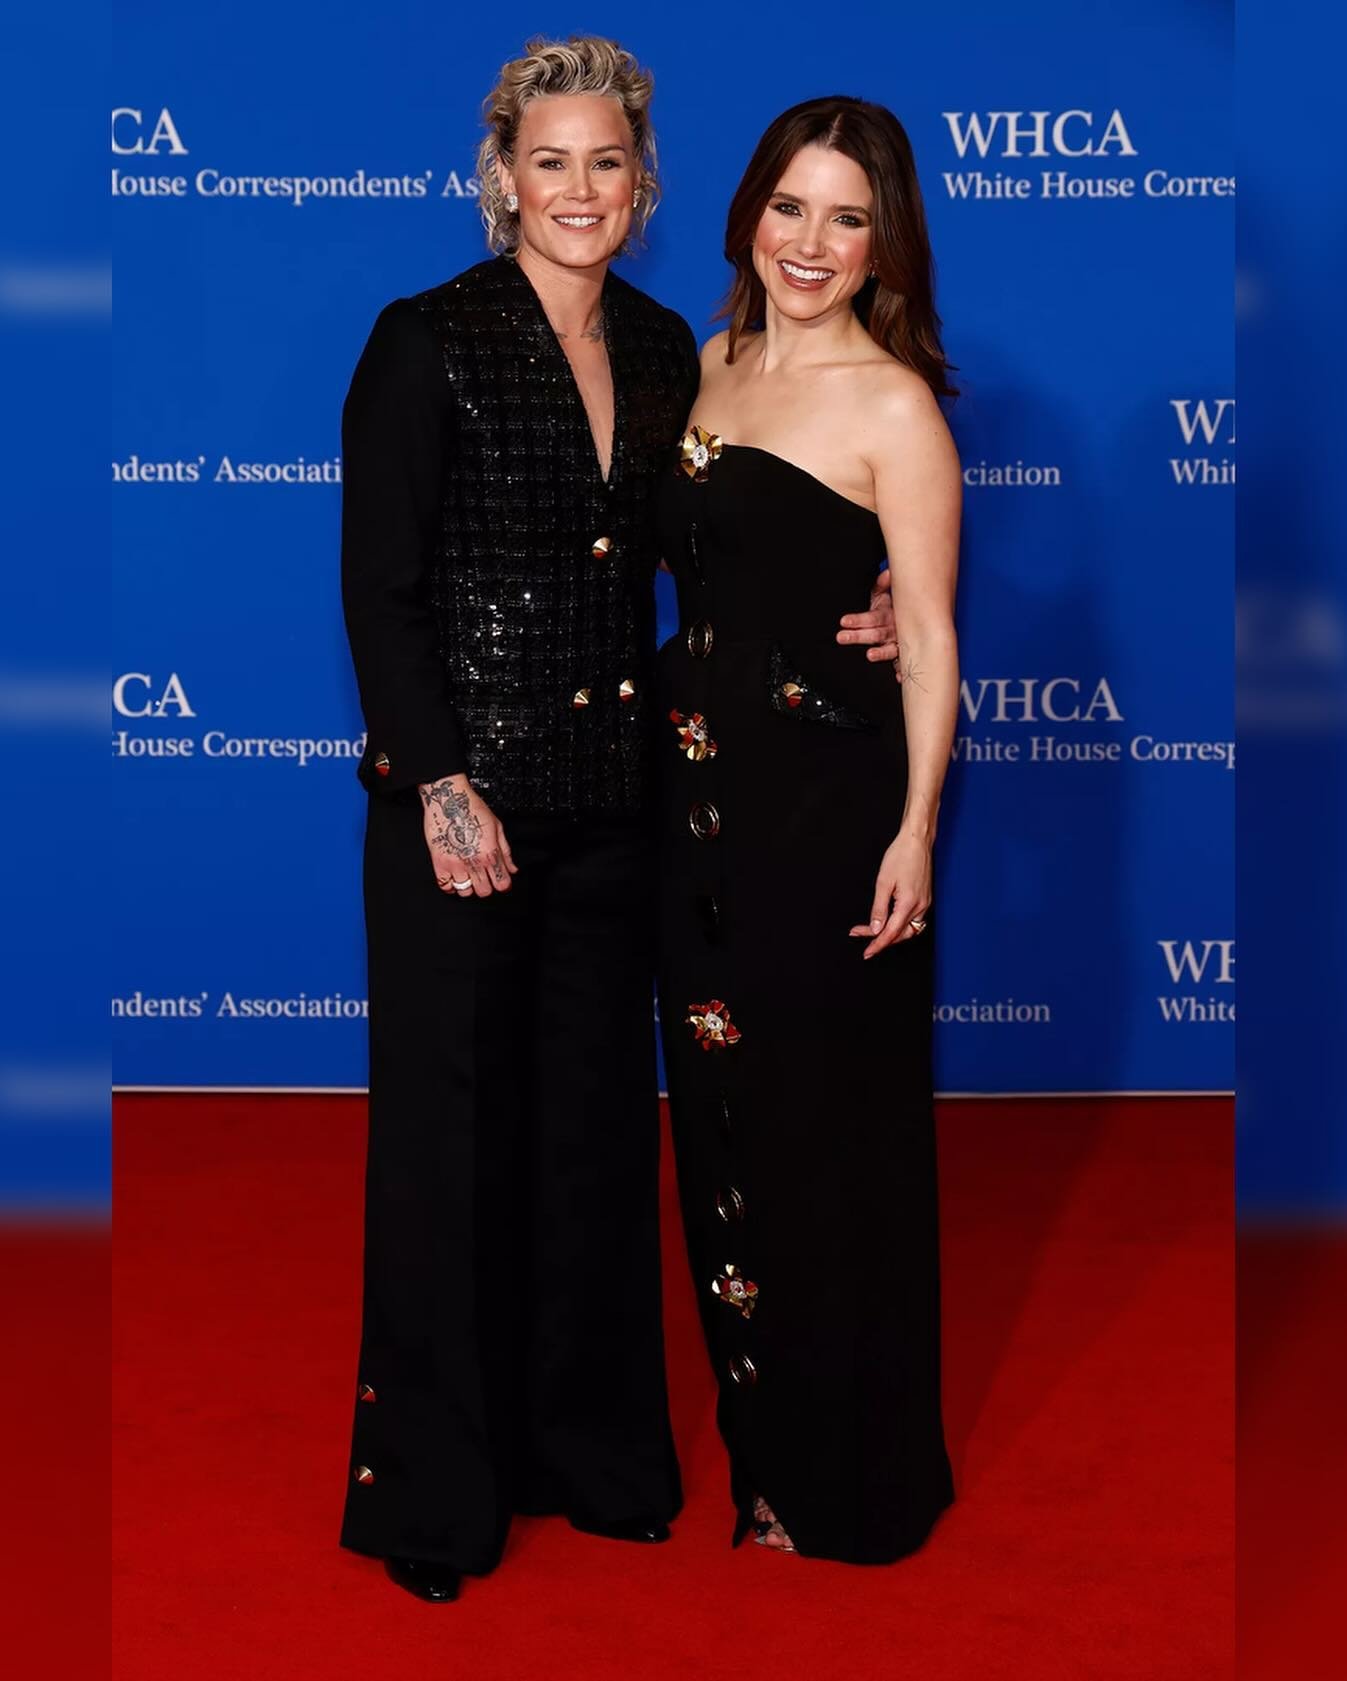 Honored to tailor @sophiabush &amp; @ashlynharris24 for the White House Correspondents Dinner! So grateful for this opportunity 🙌

Great connecting with @erwinkarmagomez &amp; @peggy_ioakim through this opportunity!

The clients wanted their pieces 